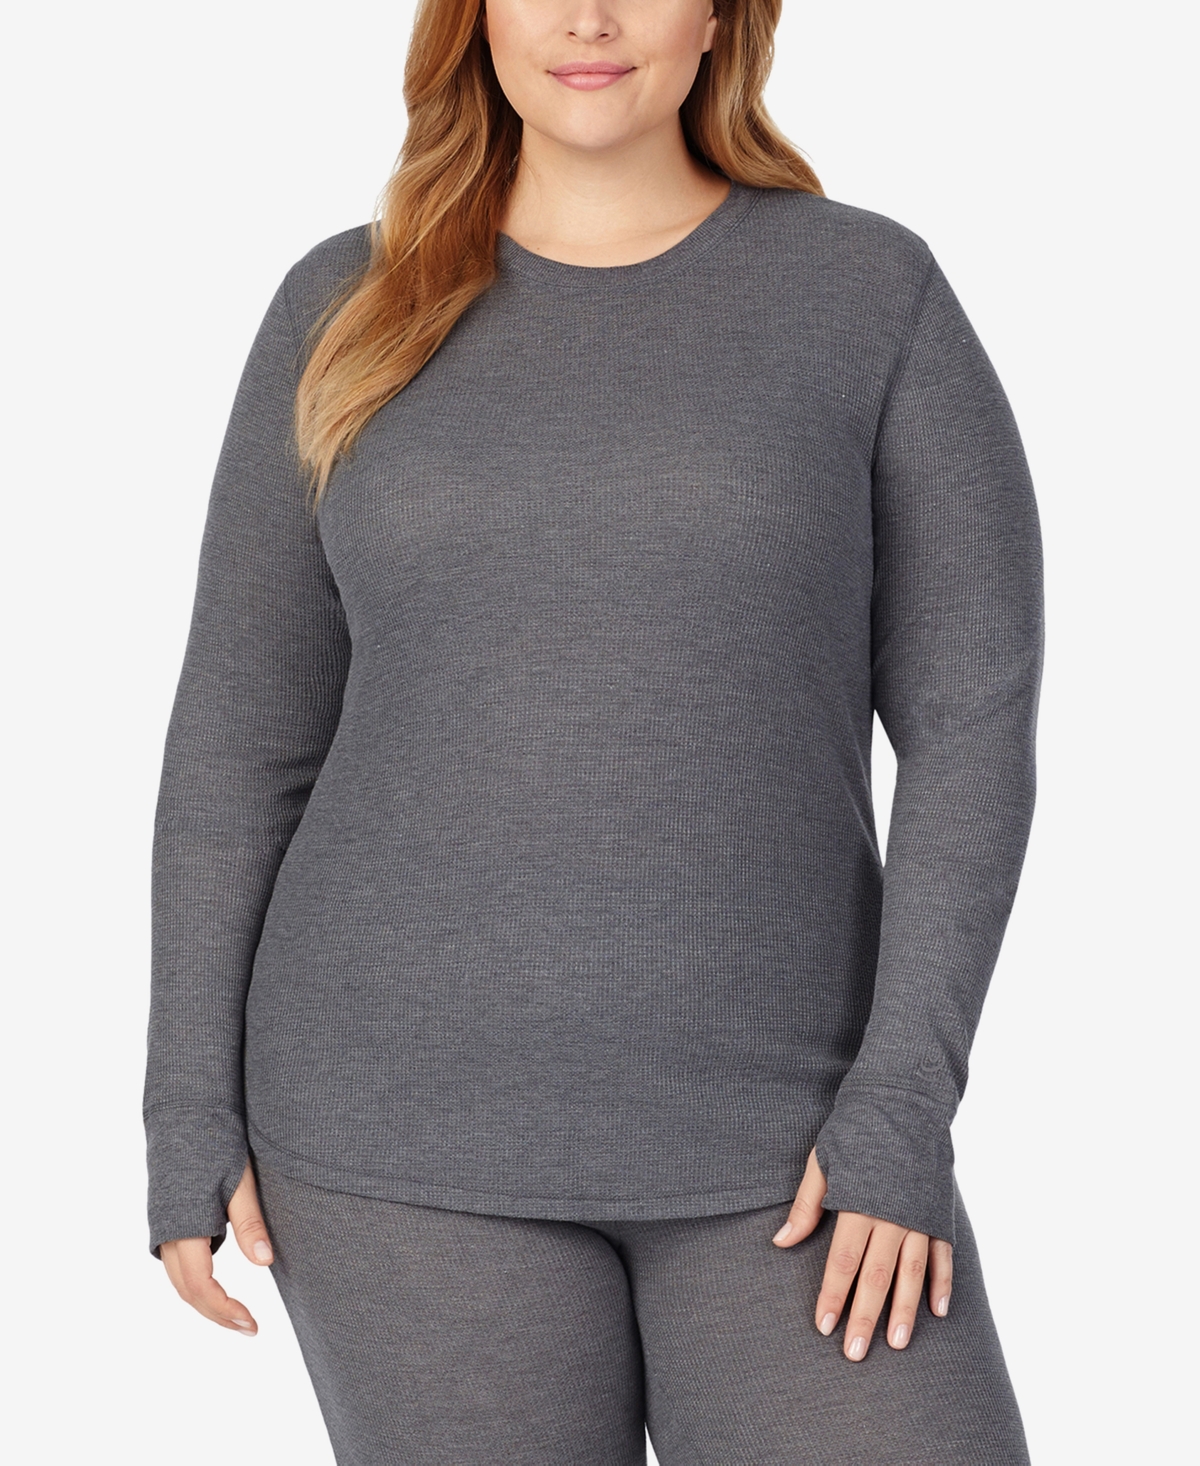 Plus Size Stretch Thermal Long-Sleeve Top - Grey Buffalo